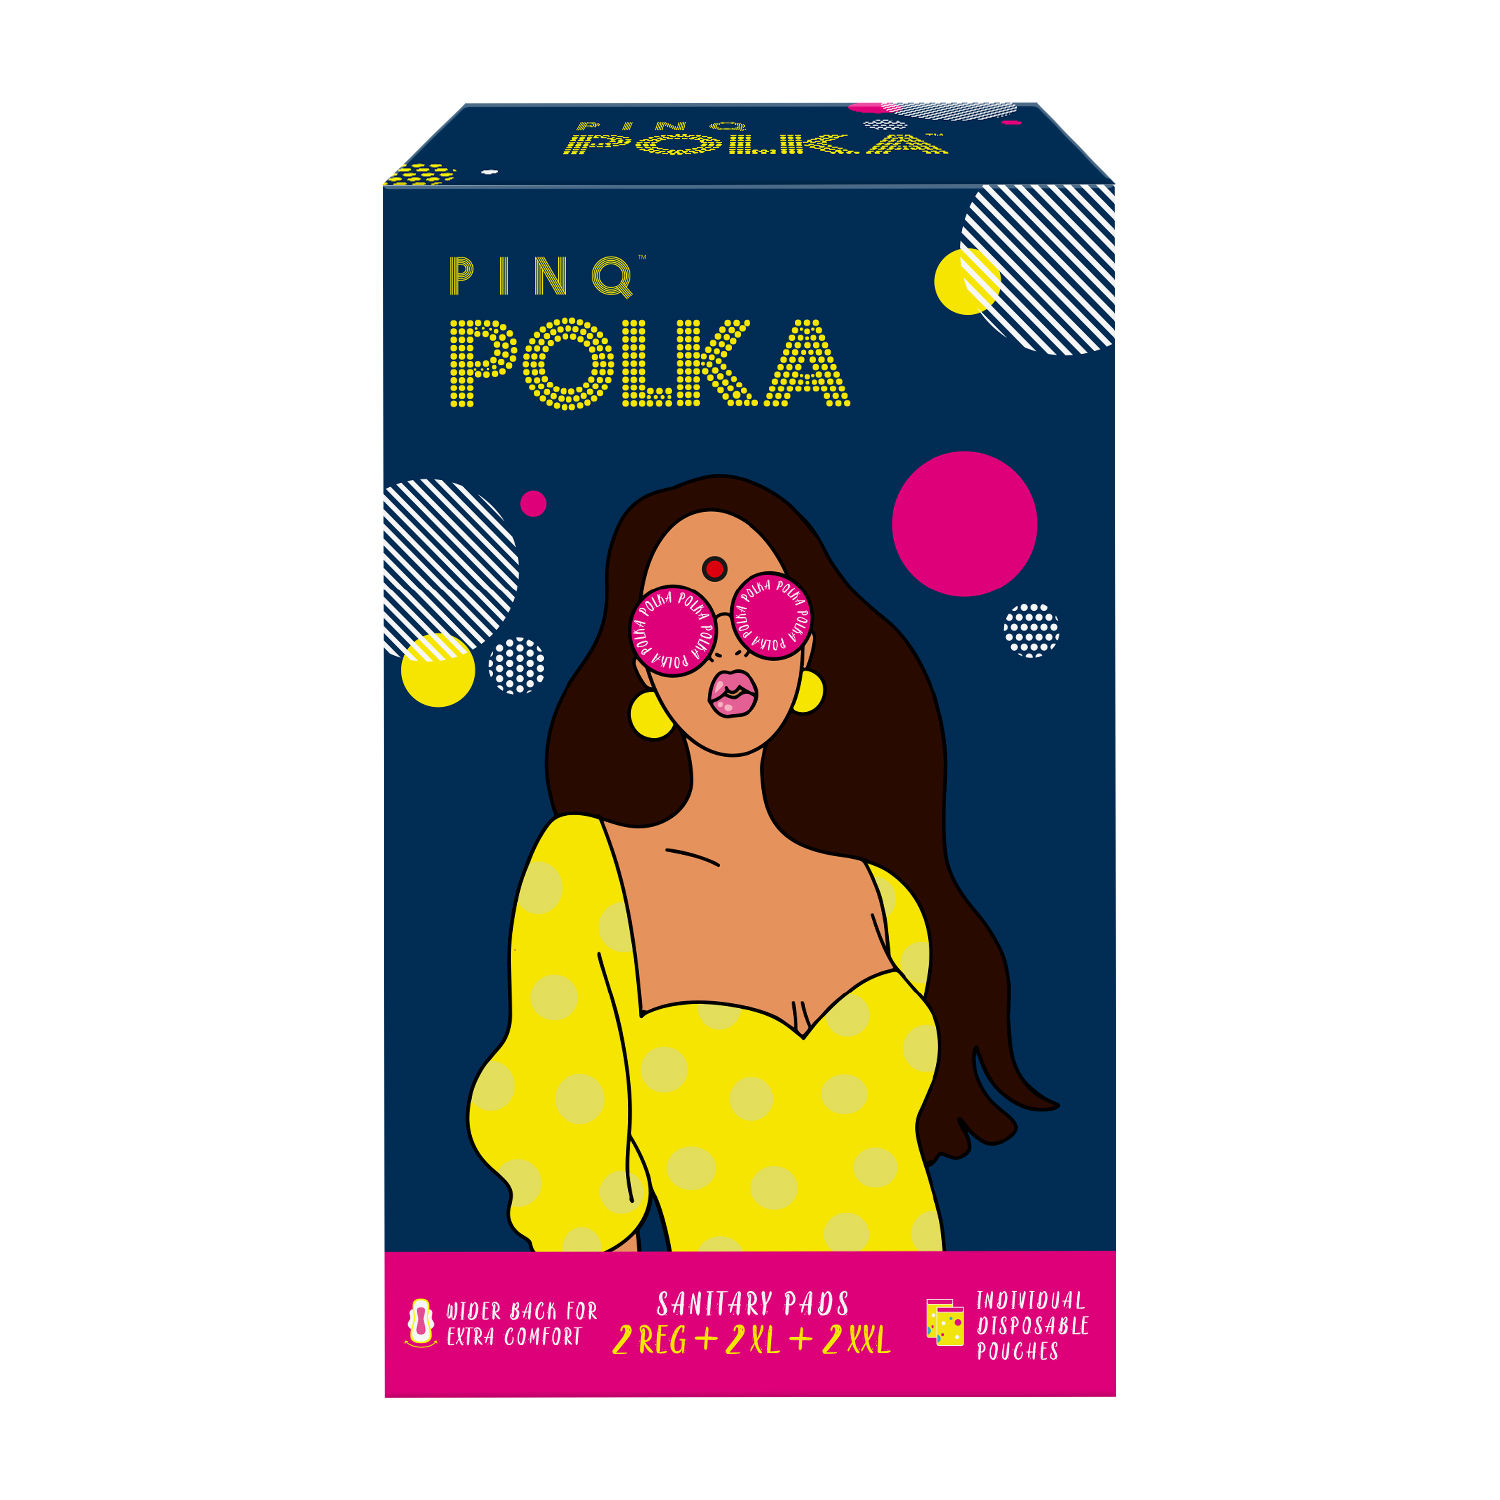 PINQ Polka Period Trial Pack Sanitary Pads 2 XXL + 2 XL + 2 Regular with Disposable Pouch